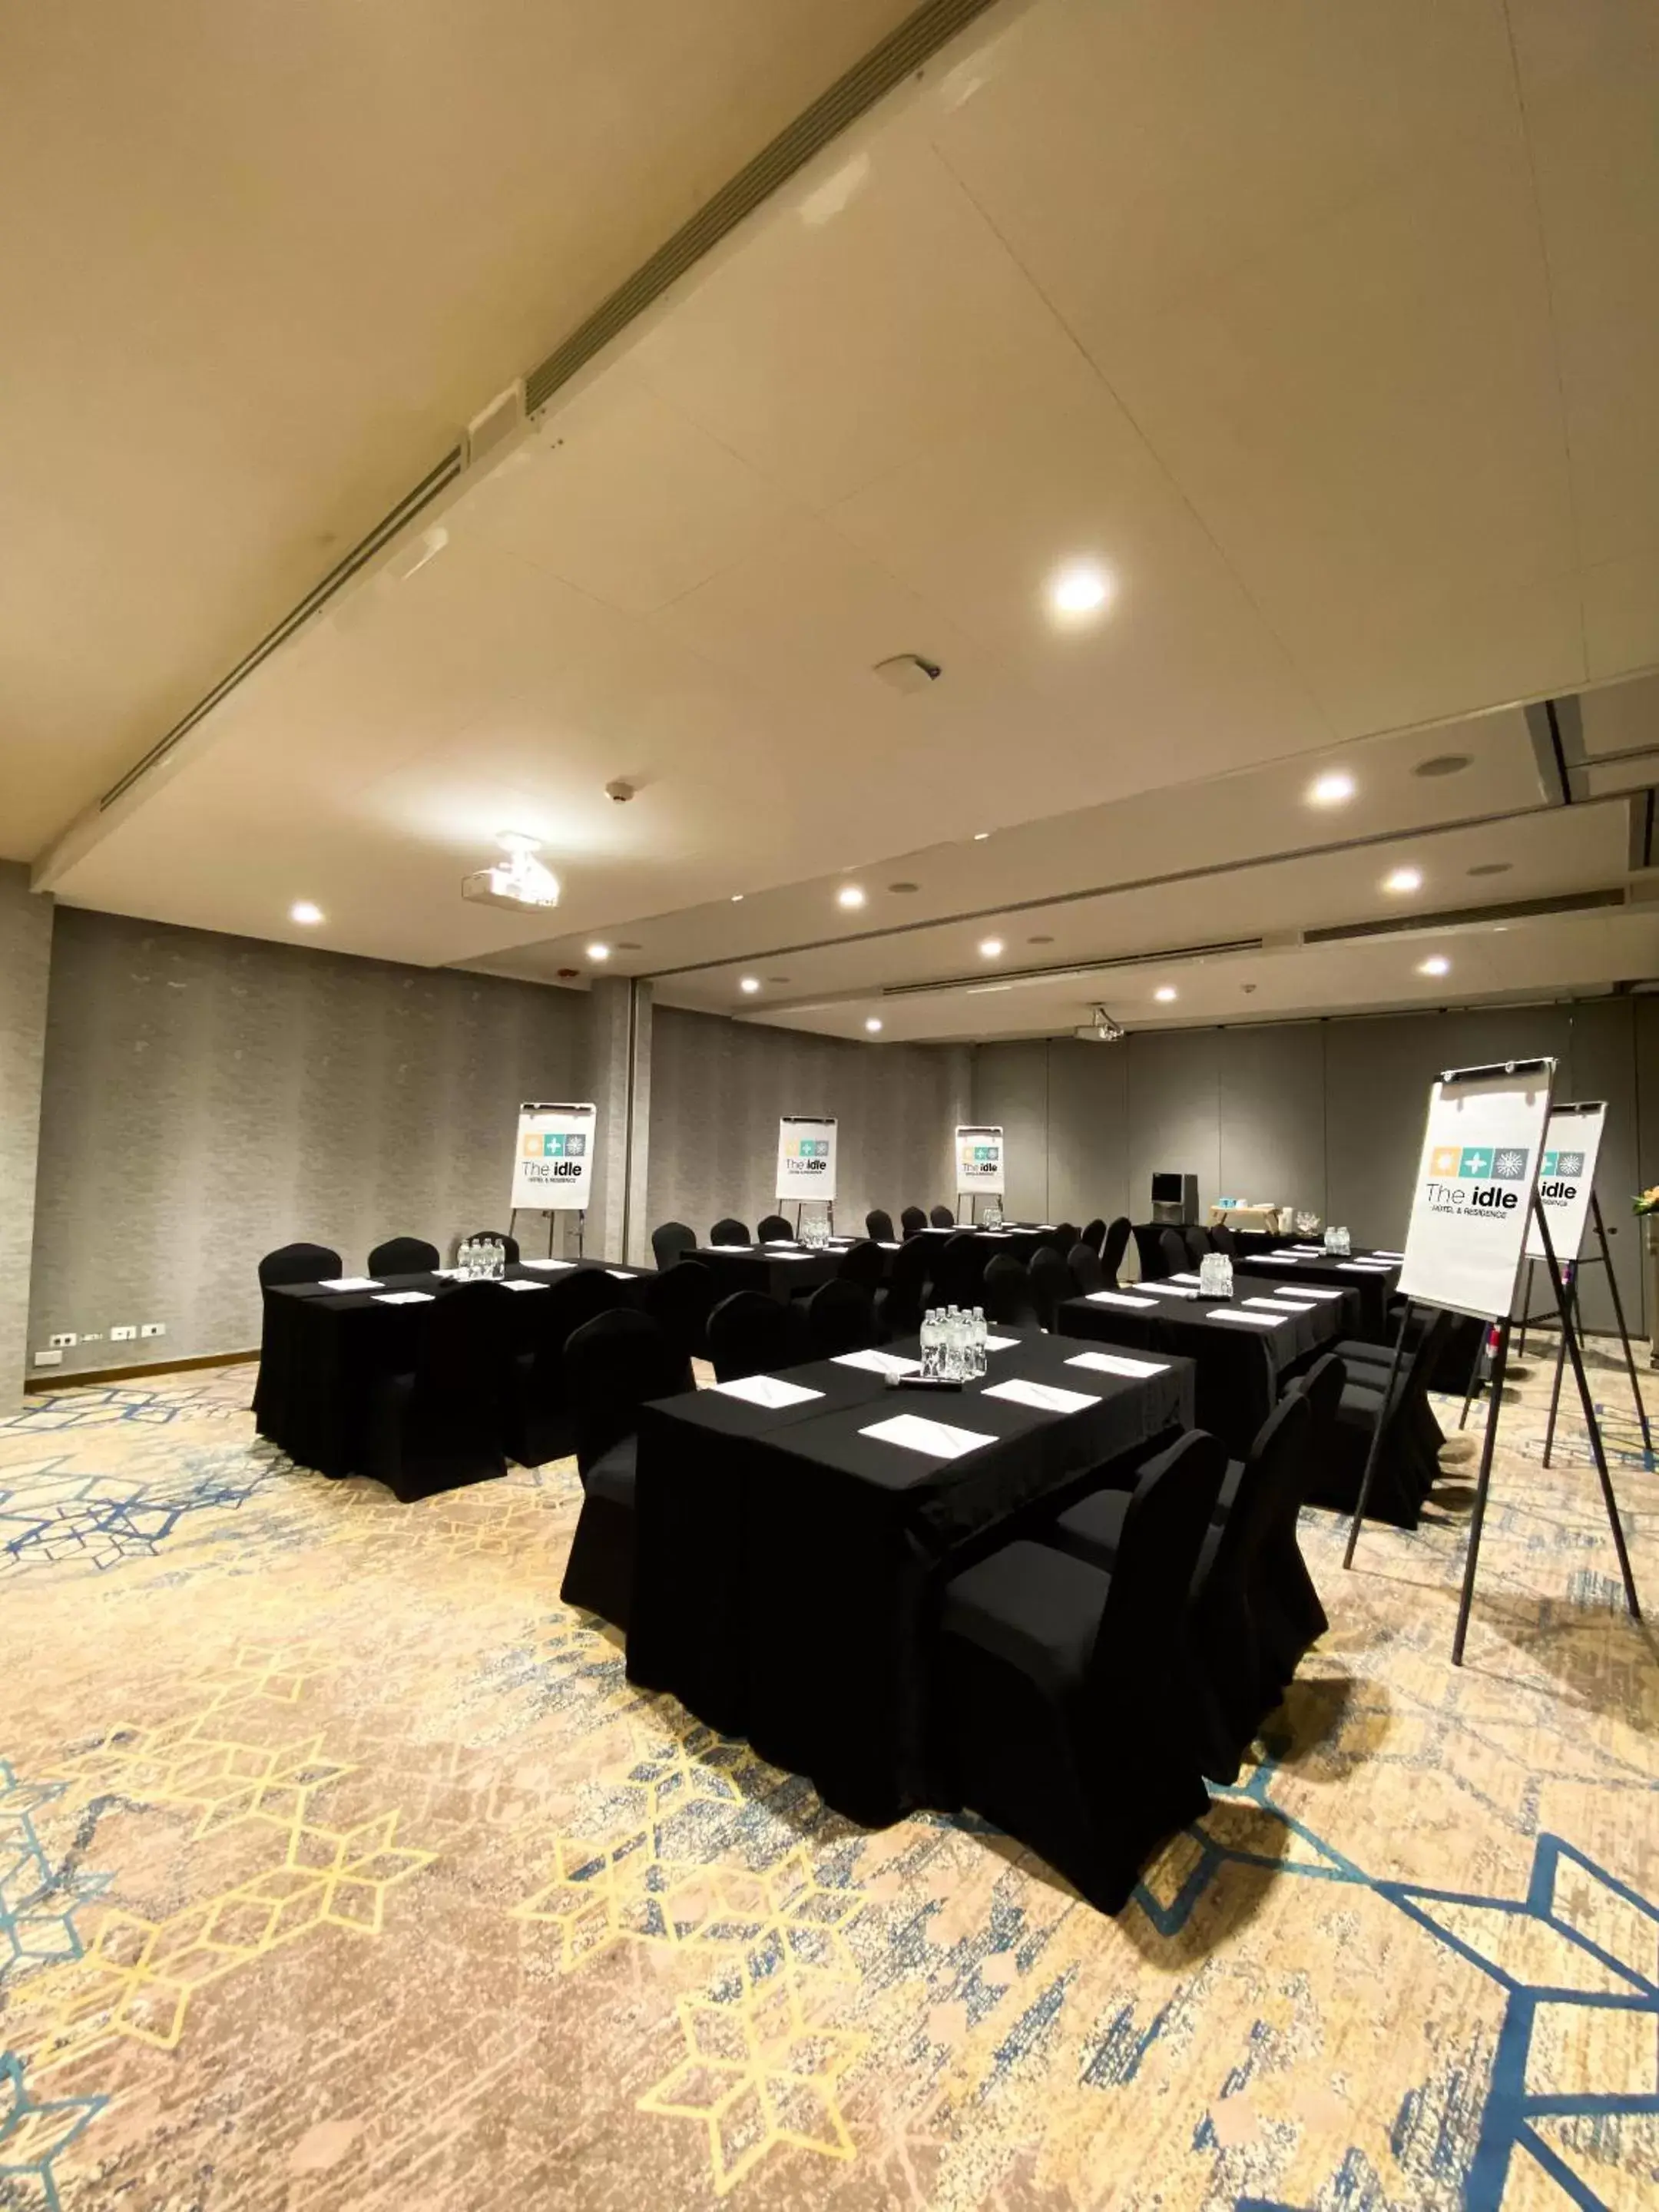 Meeting/conference room in The Idle Hotel and Residence - SHA Plus Certified